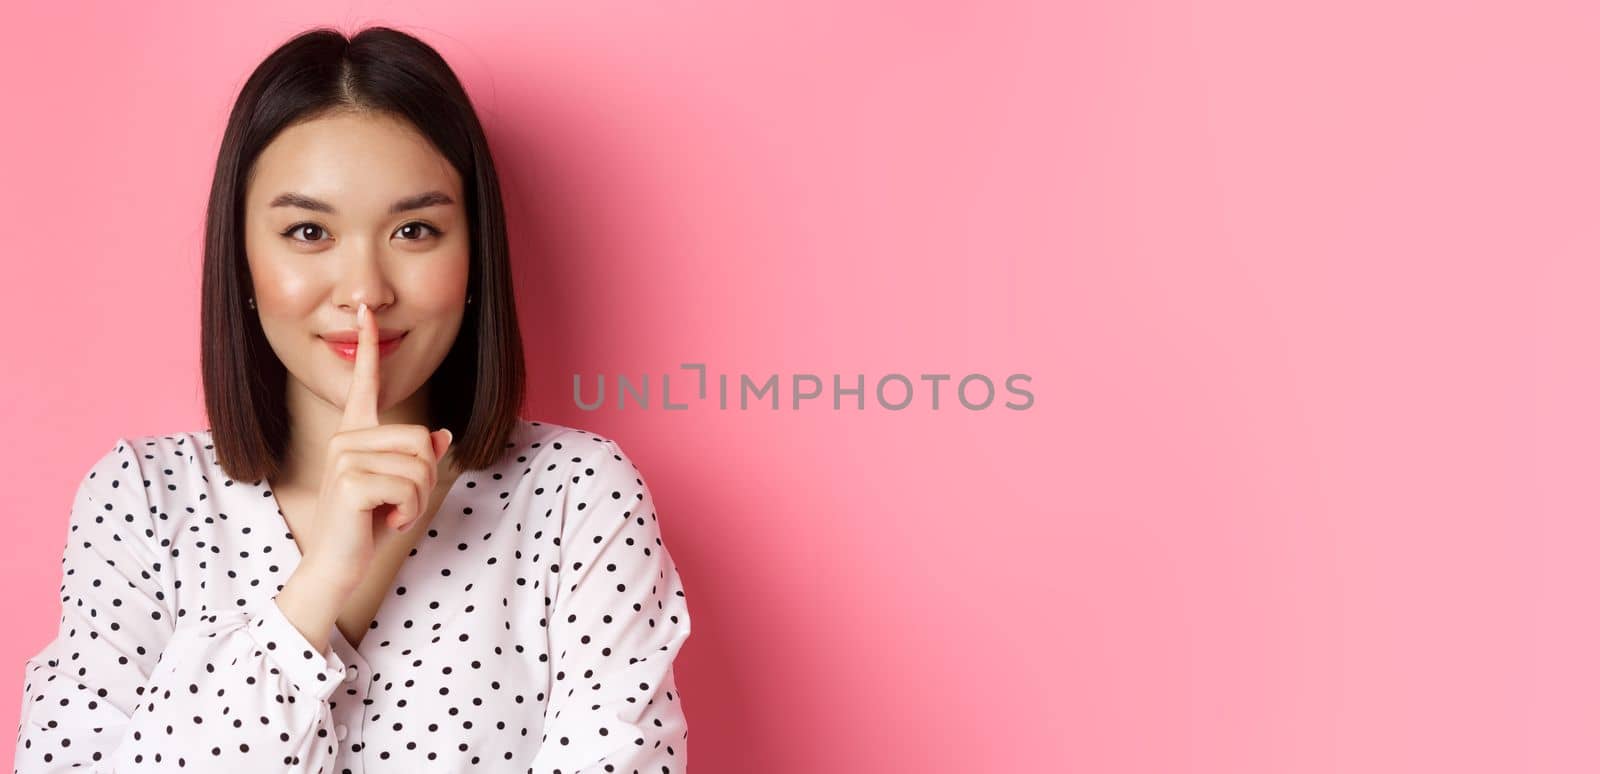 Close-up of mysterious asian woman hiding a secret, hushing and telling to keep quiet, standing over pink background by Benzoix